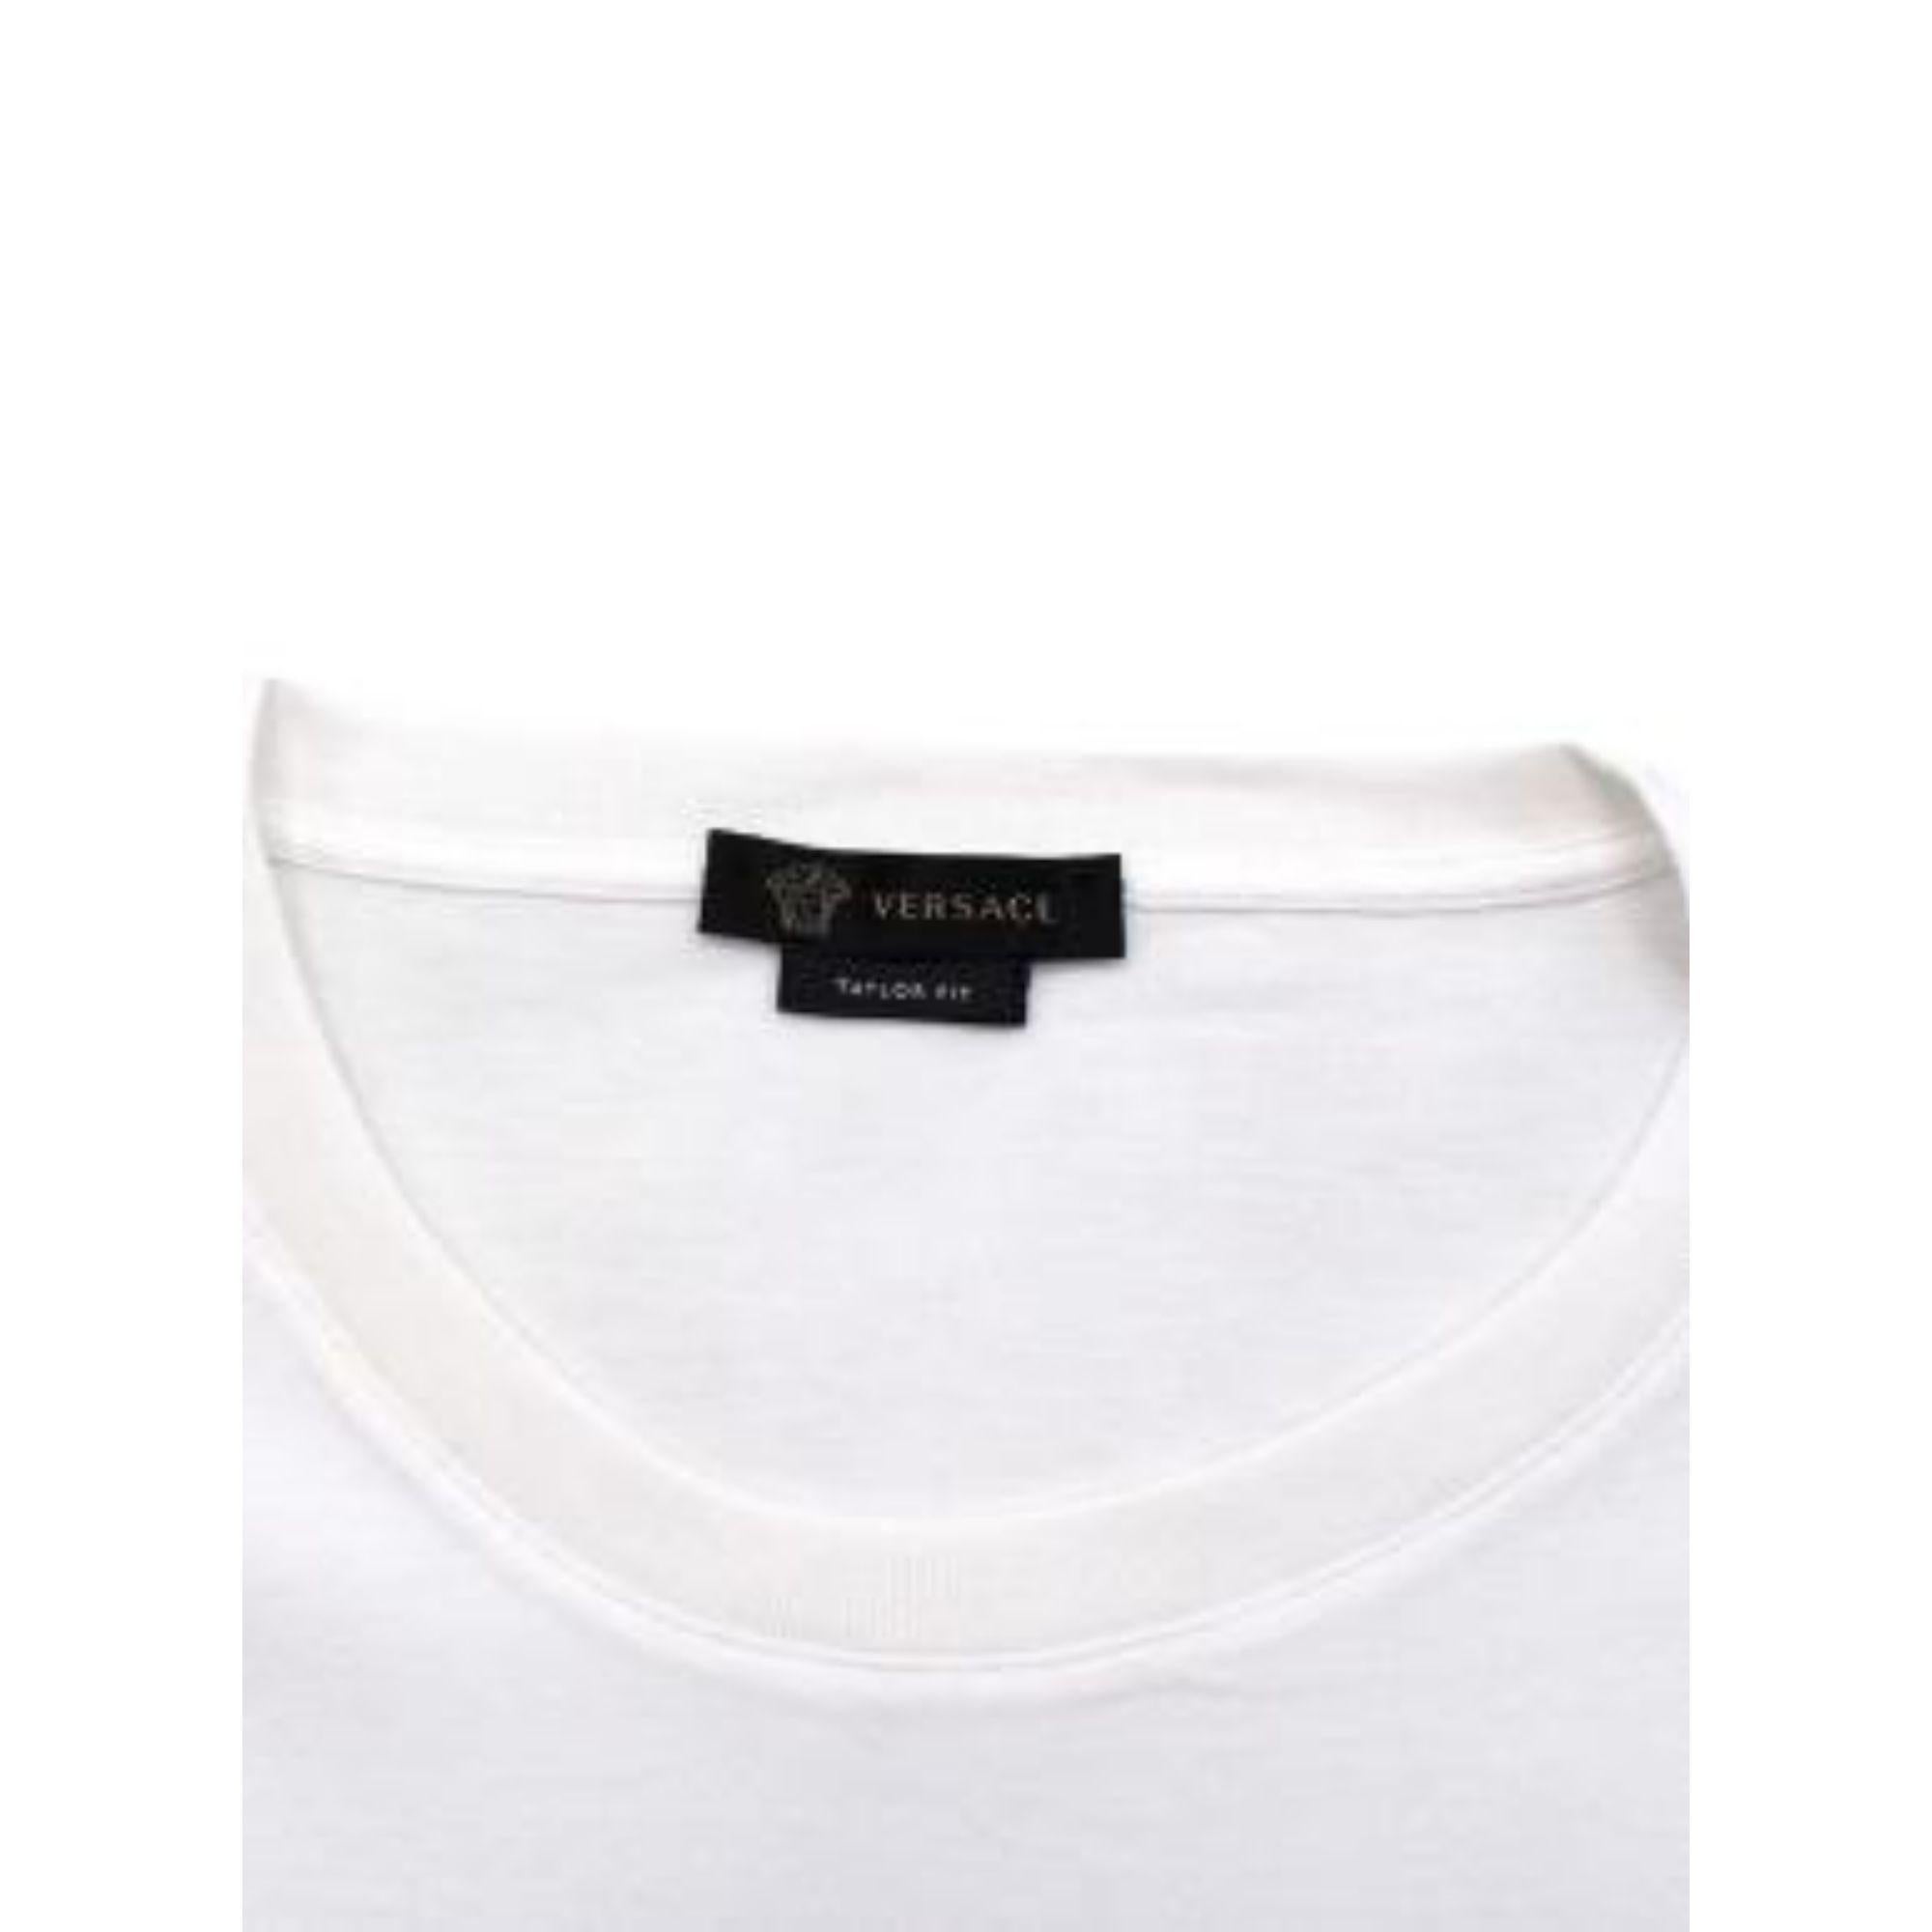 Versace White and Black Gianni Logo T-shirt For Sale 2